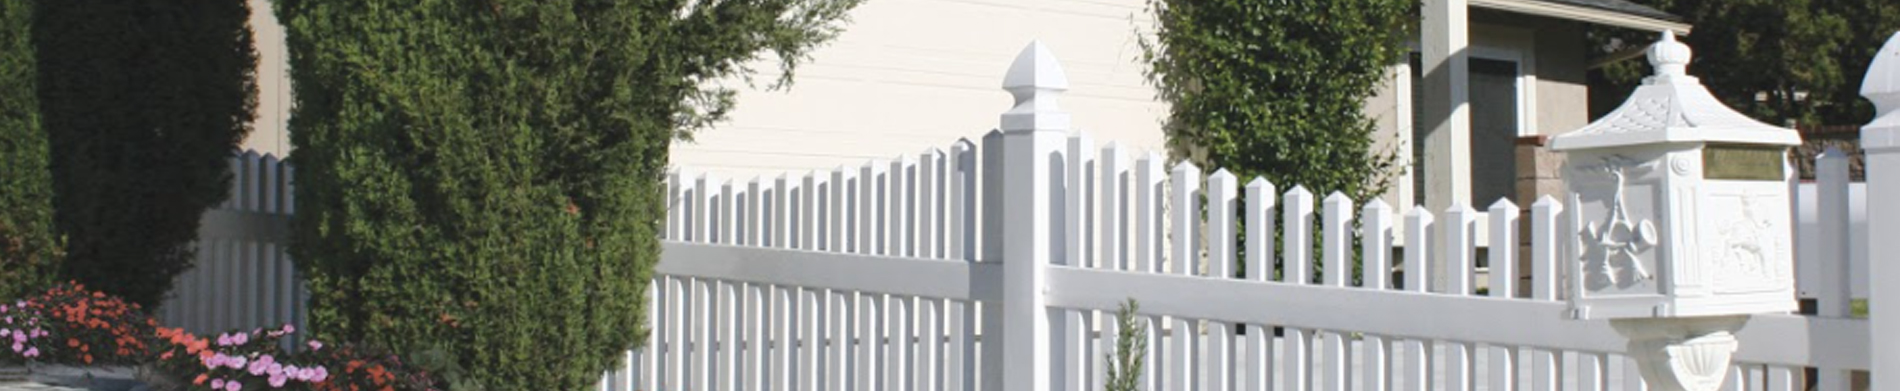 How about installing traditional vinyl fencing from Duramax?